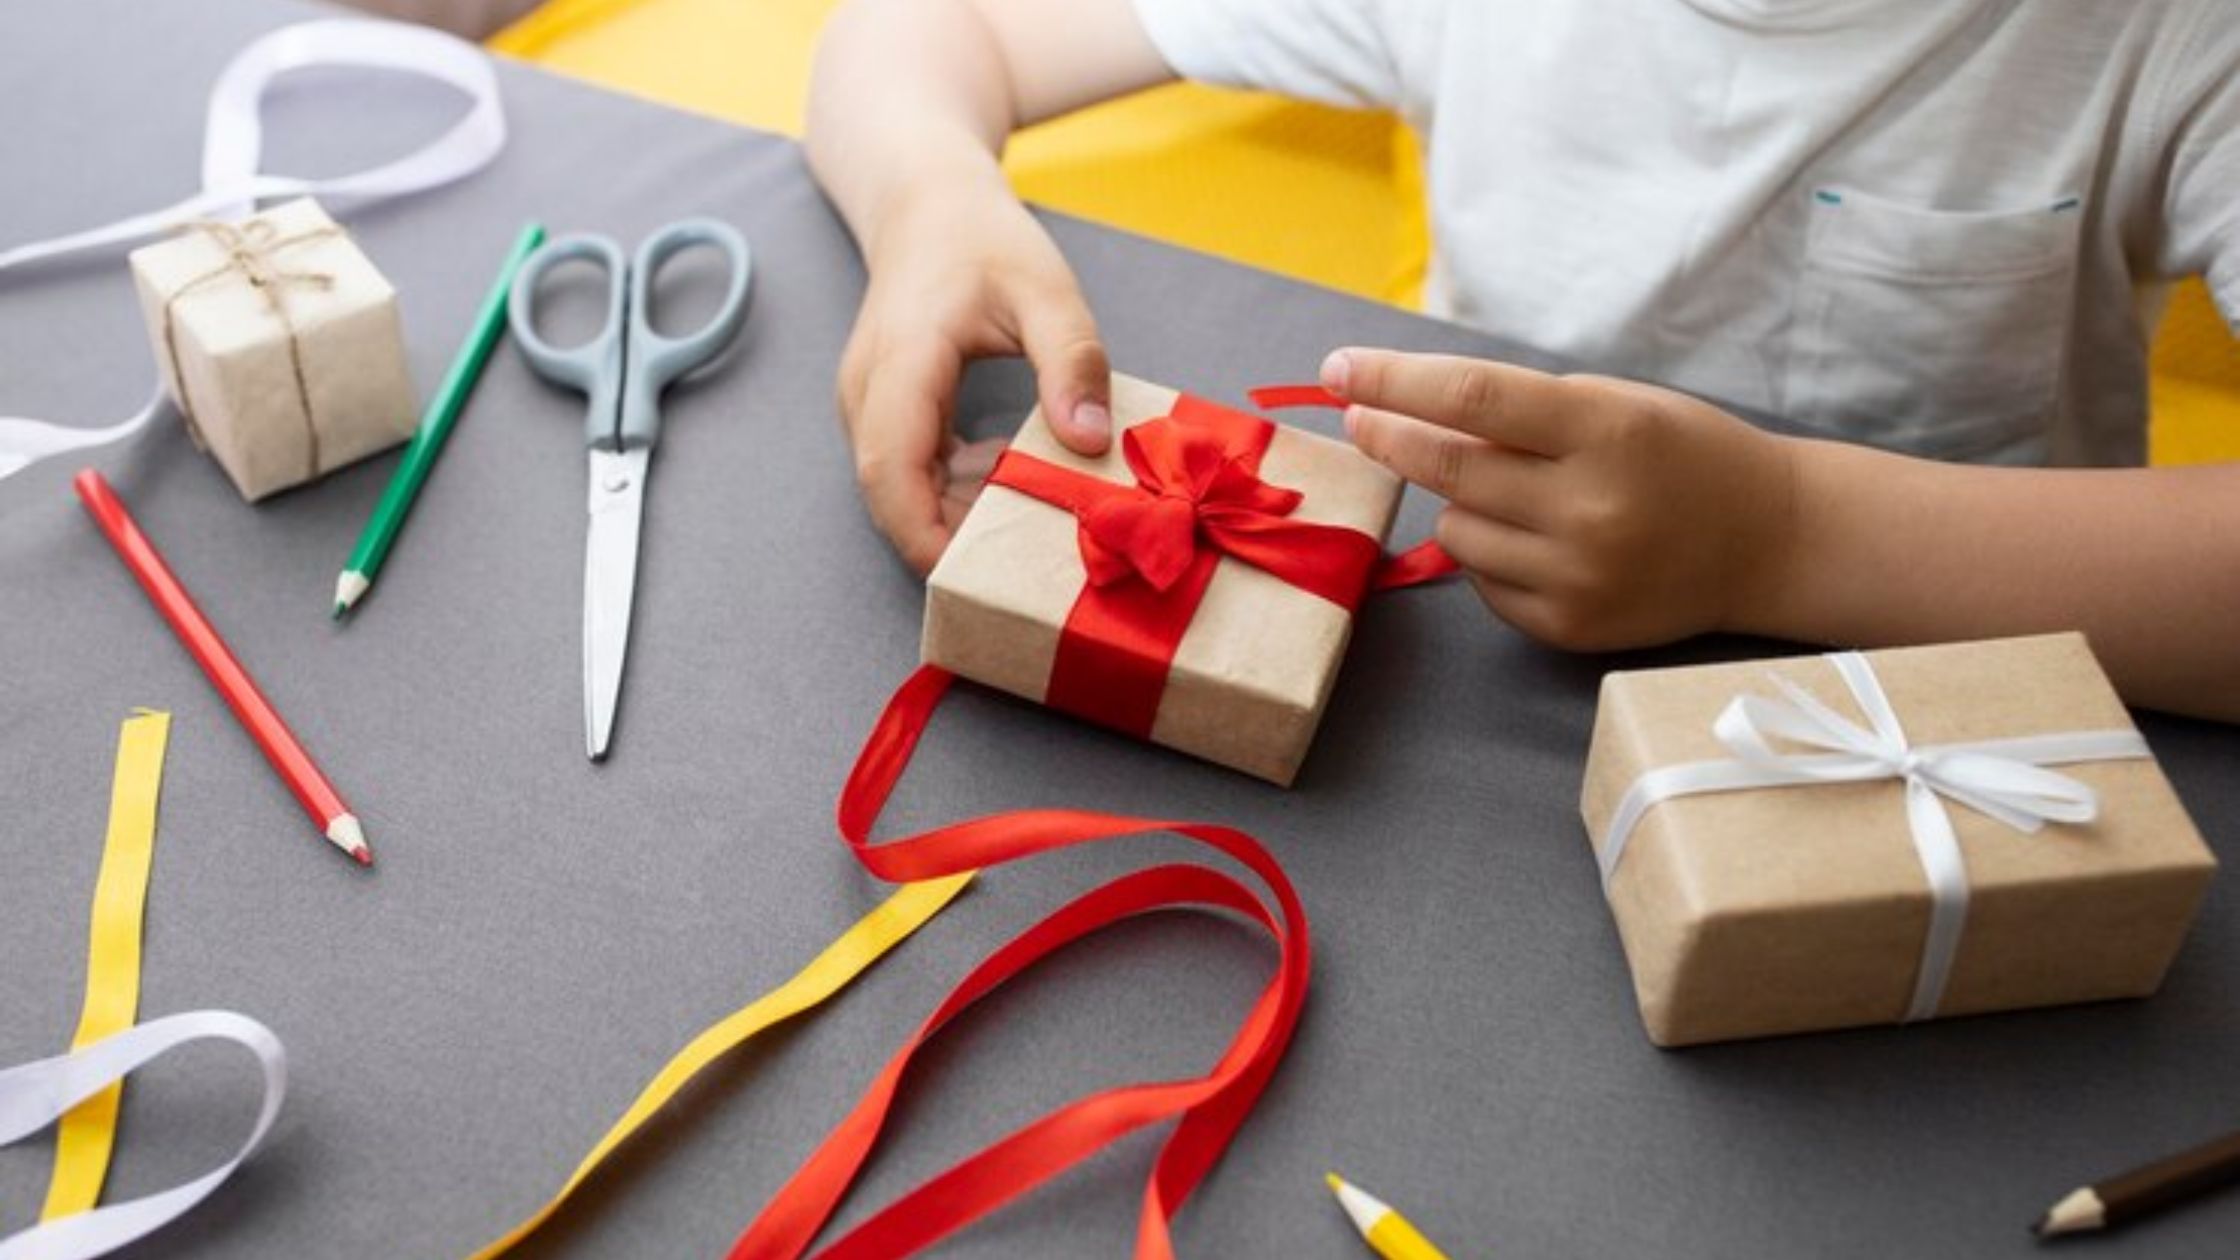 A Guide to Customized and Personalized Gifts in Singapore